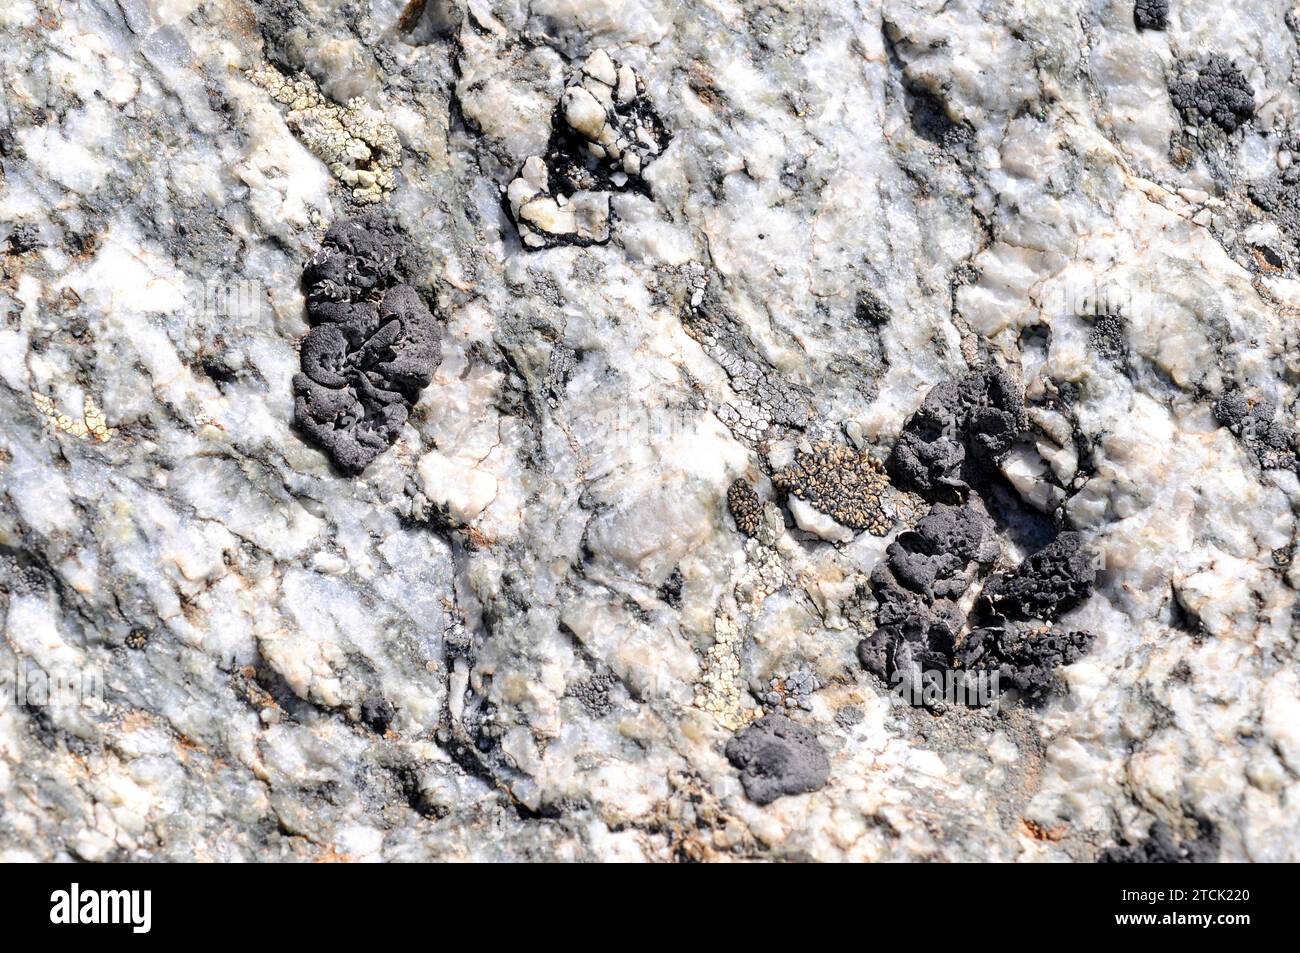 Umbilicaria deusta is a foliose lichen that grows on siliceous rocks. This photo was taken in french Alps. Stock Photo